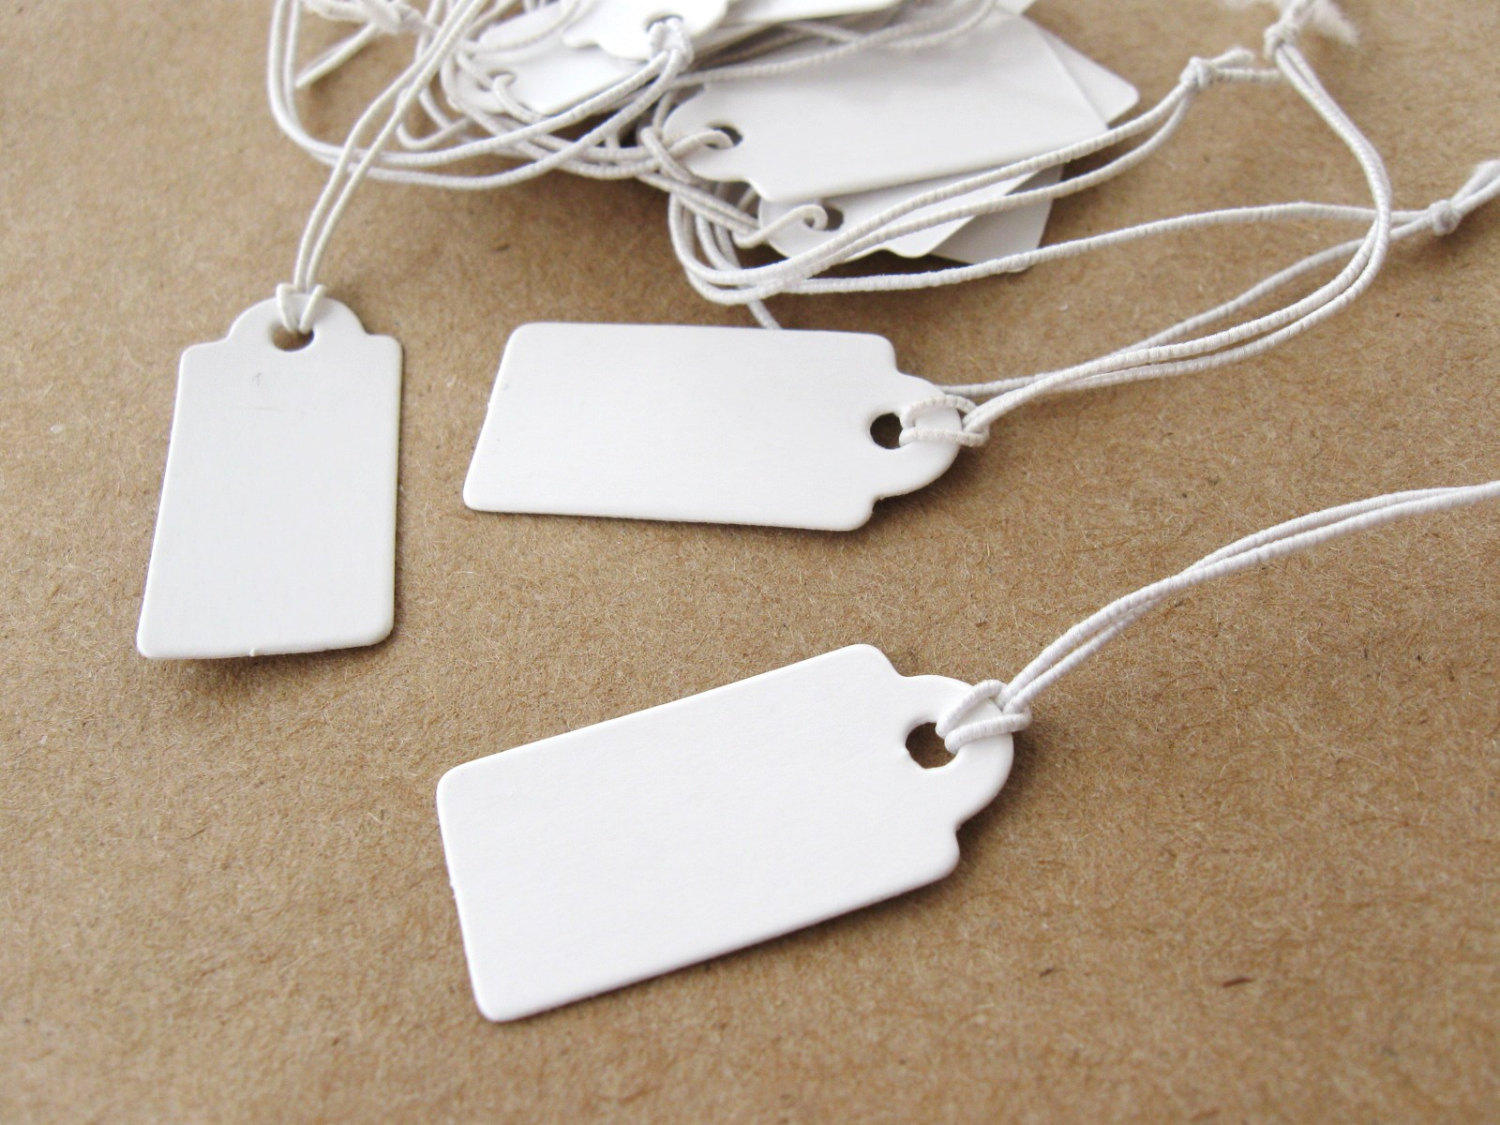 White Tags with String- 100pcs Marking Strung Tags Writable Price Labels  Display Tags Jewelry Tags with String for Pricing Gift Jewelry